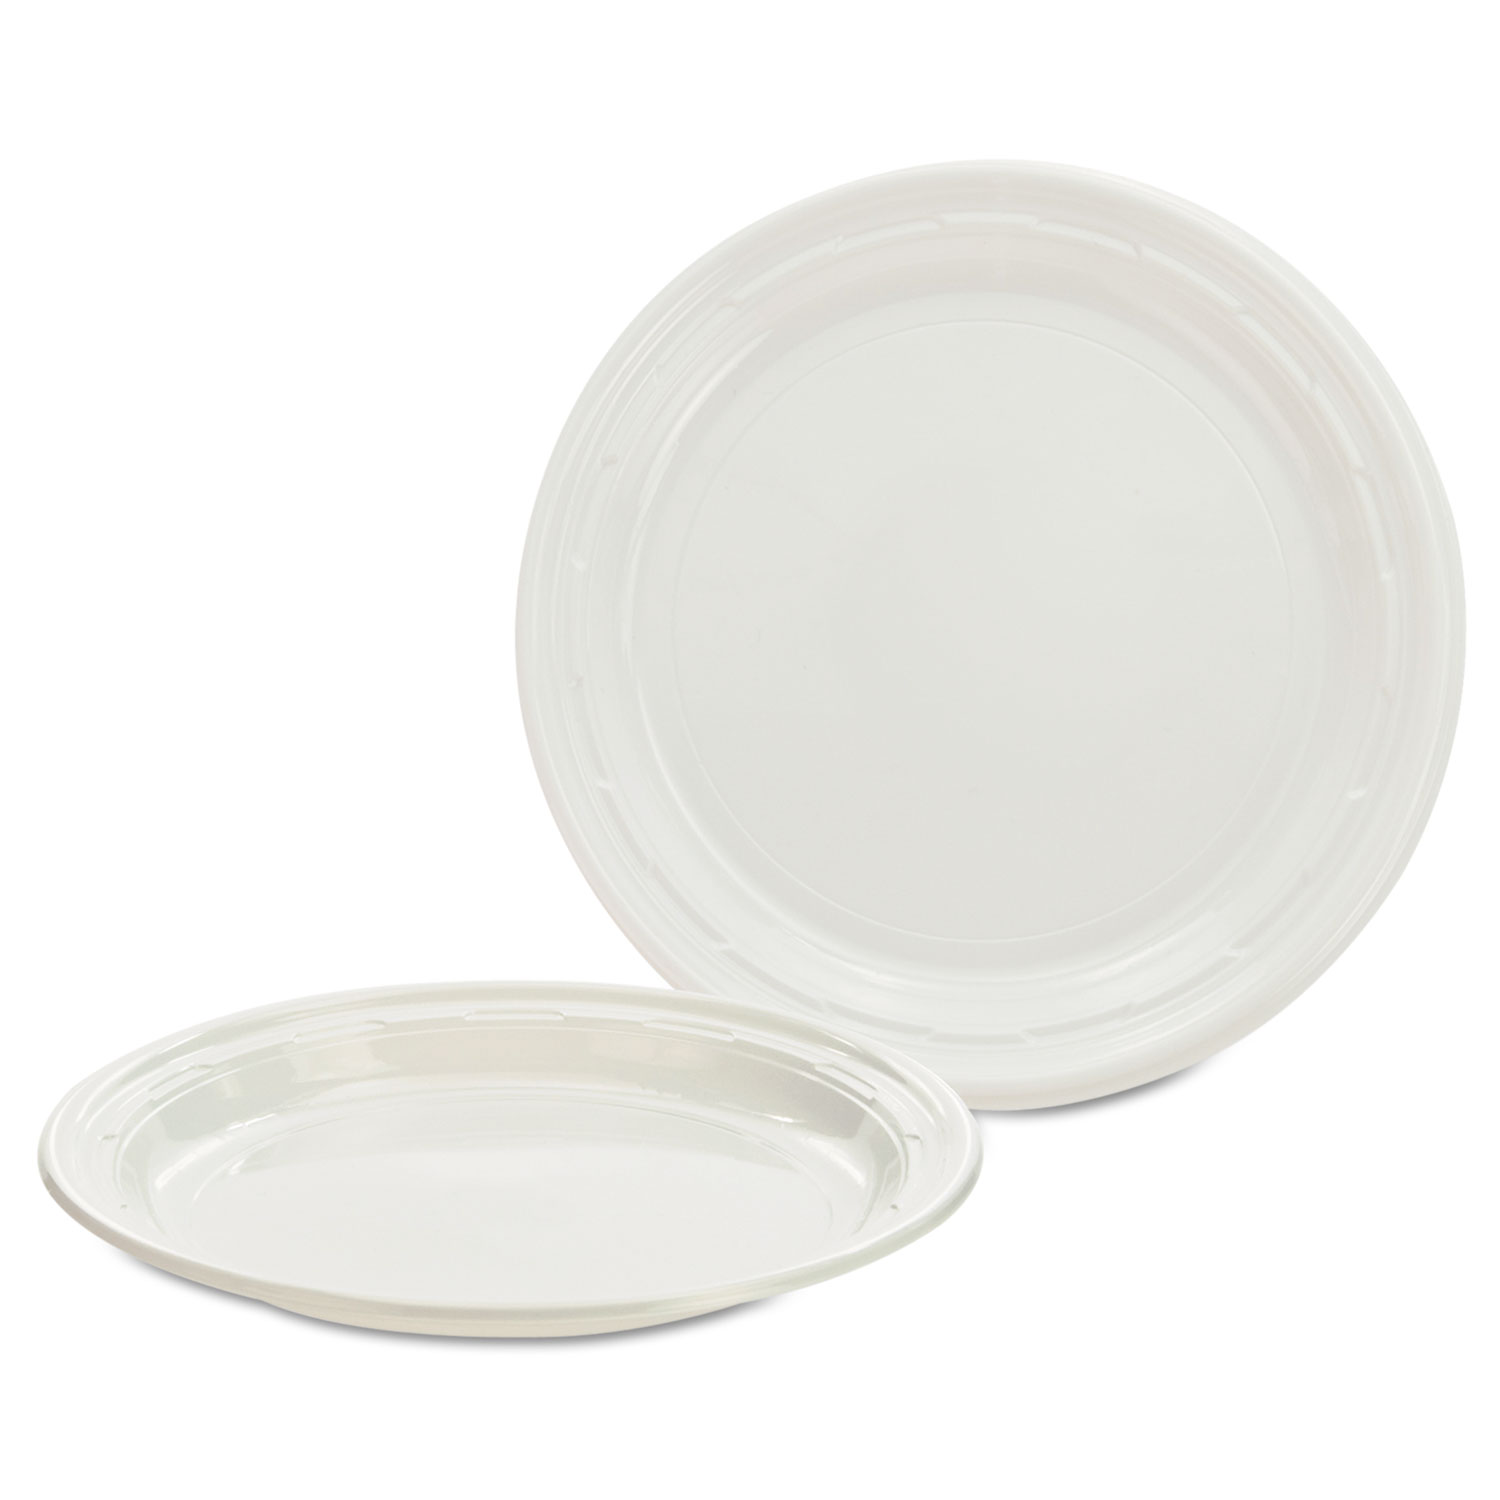  Dart 7PWF Plastic Plates, 7 Inches, White, Round, 125/Pack, 8 Packs/Carton (DCC7PWF) 